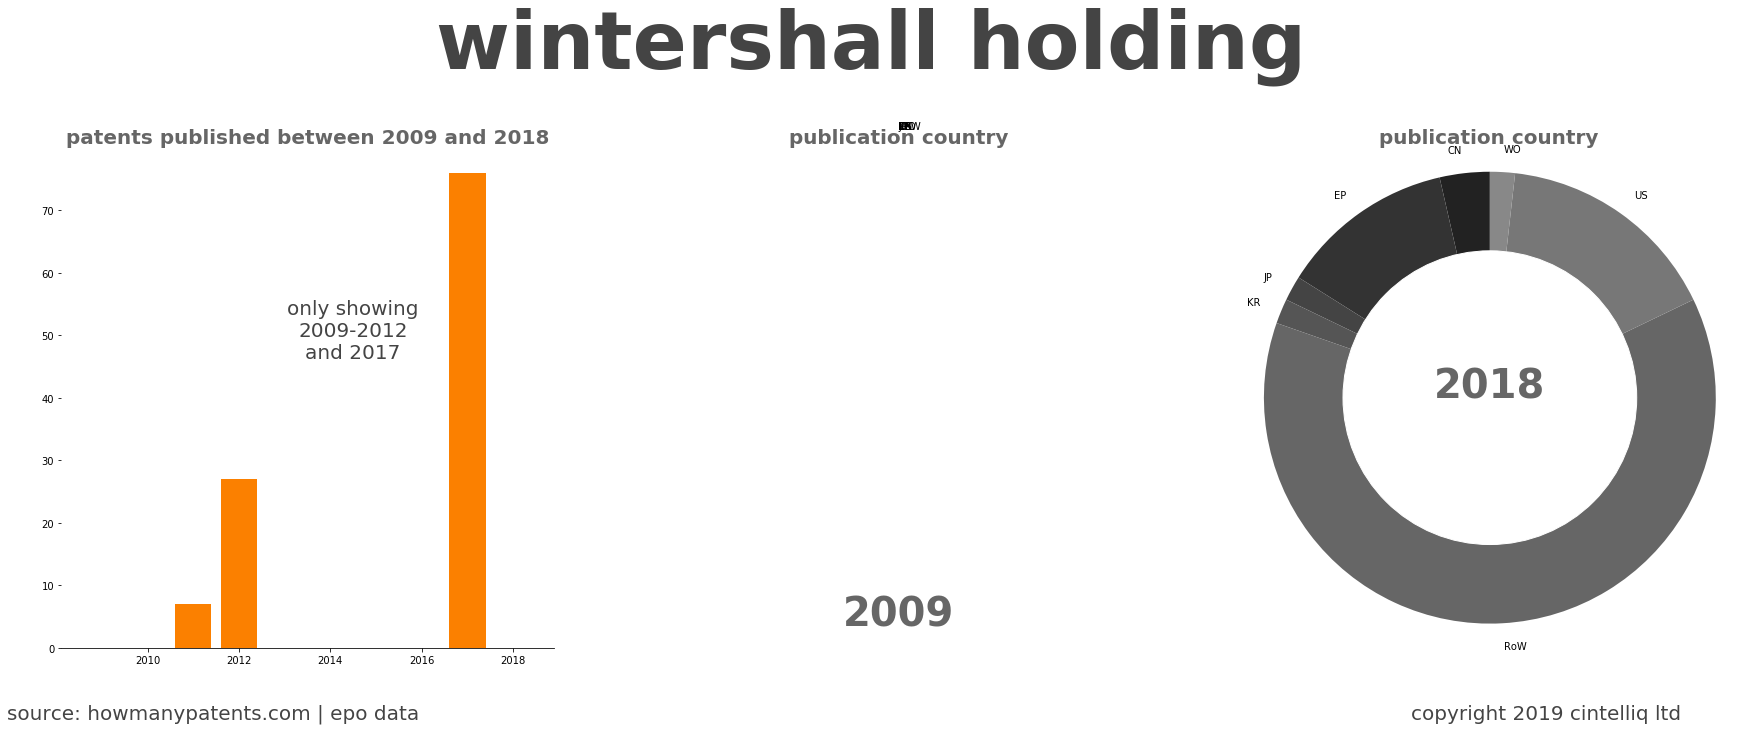 summary of patents for Wintershall Holding